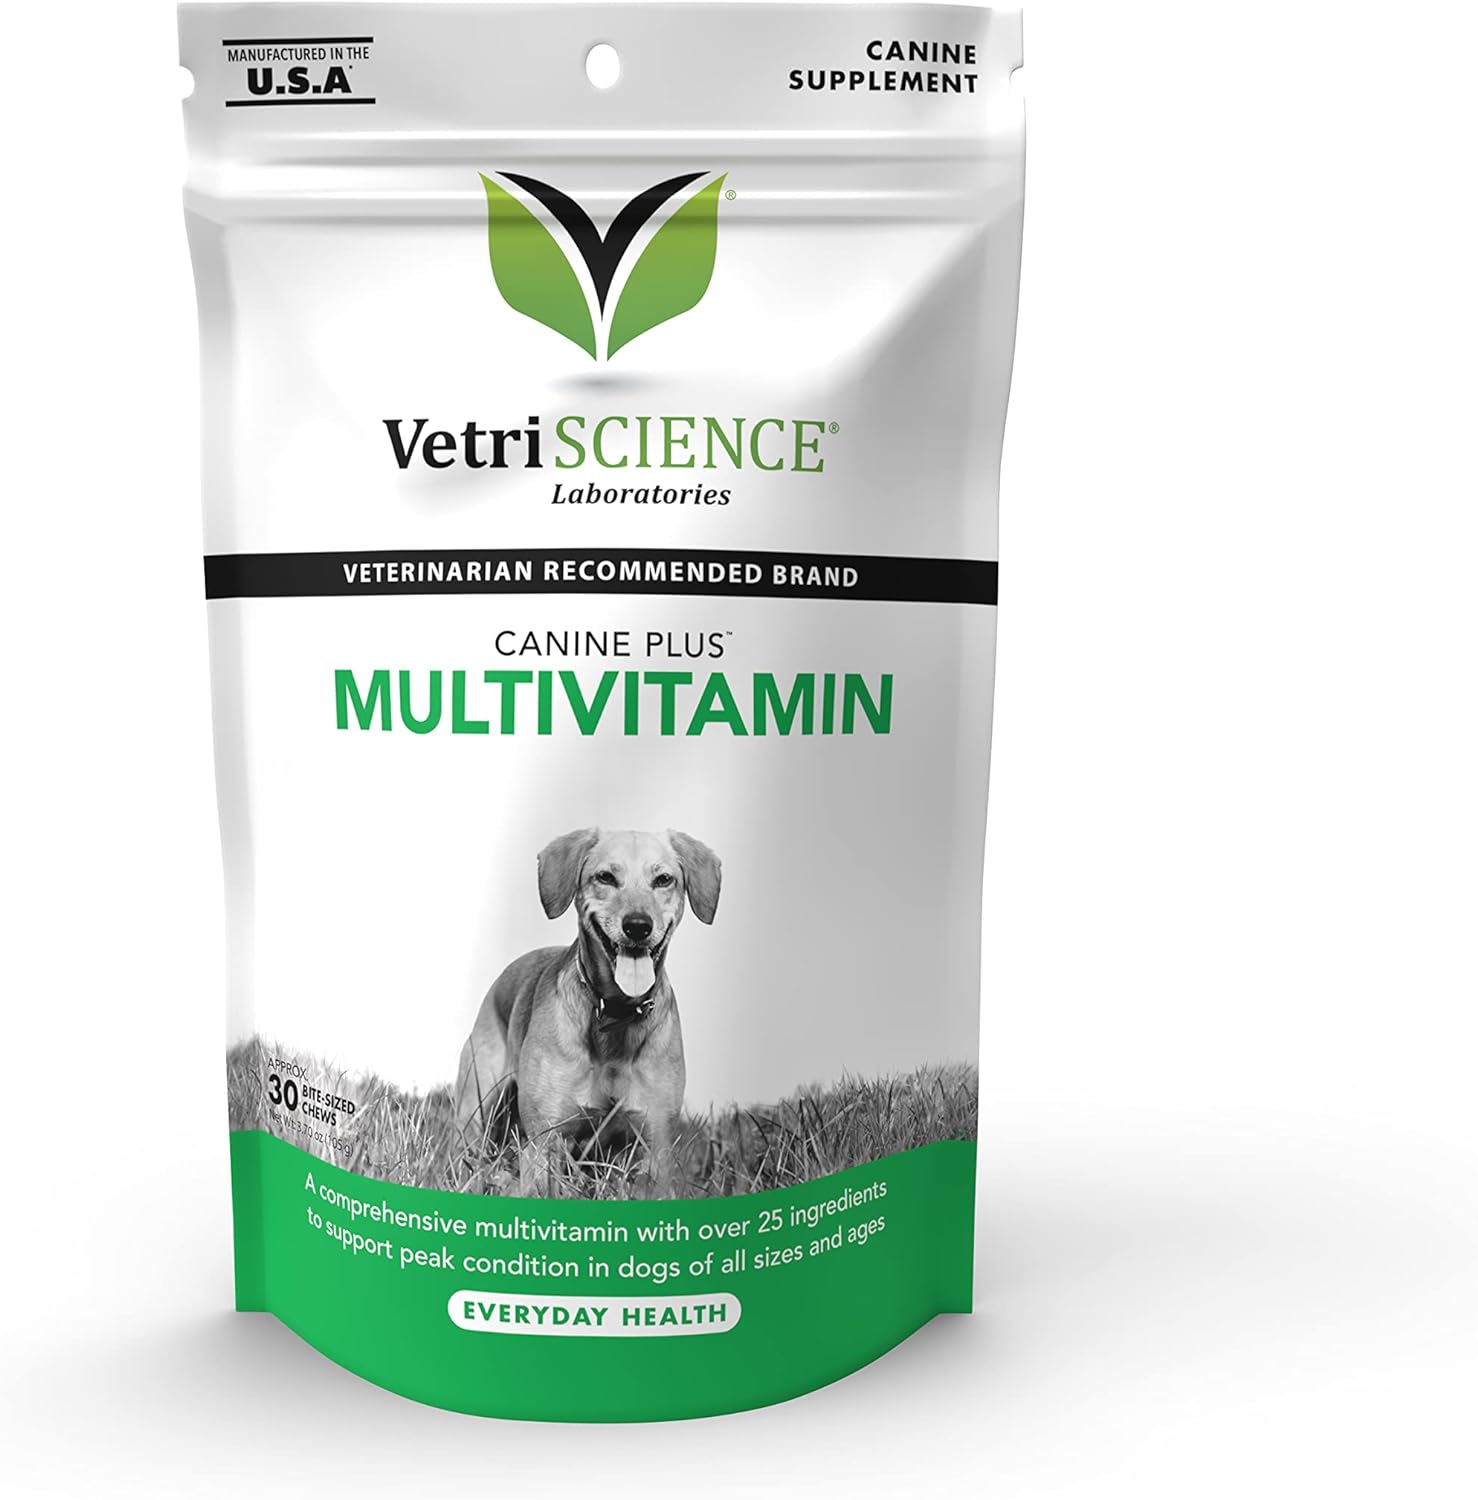 VETRISCIENCE Canine Plus MultiVitamin for Dogs - Vet Recommended Vitamin Supplement - Supports Mood, Skin, Coat, Liver Function,All Dogs,30 Chews